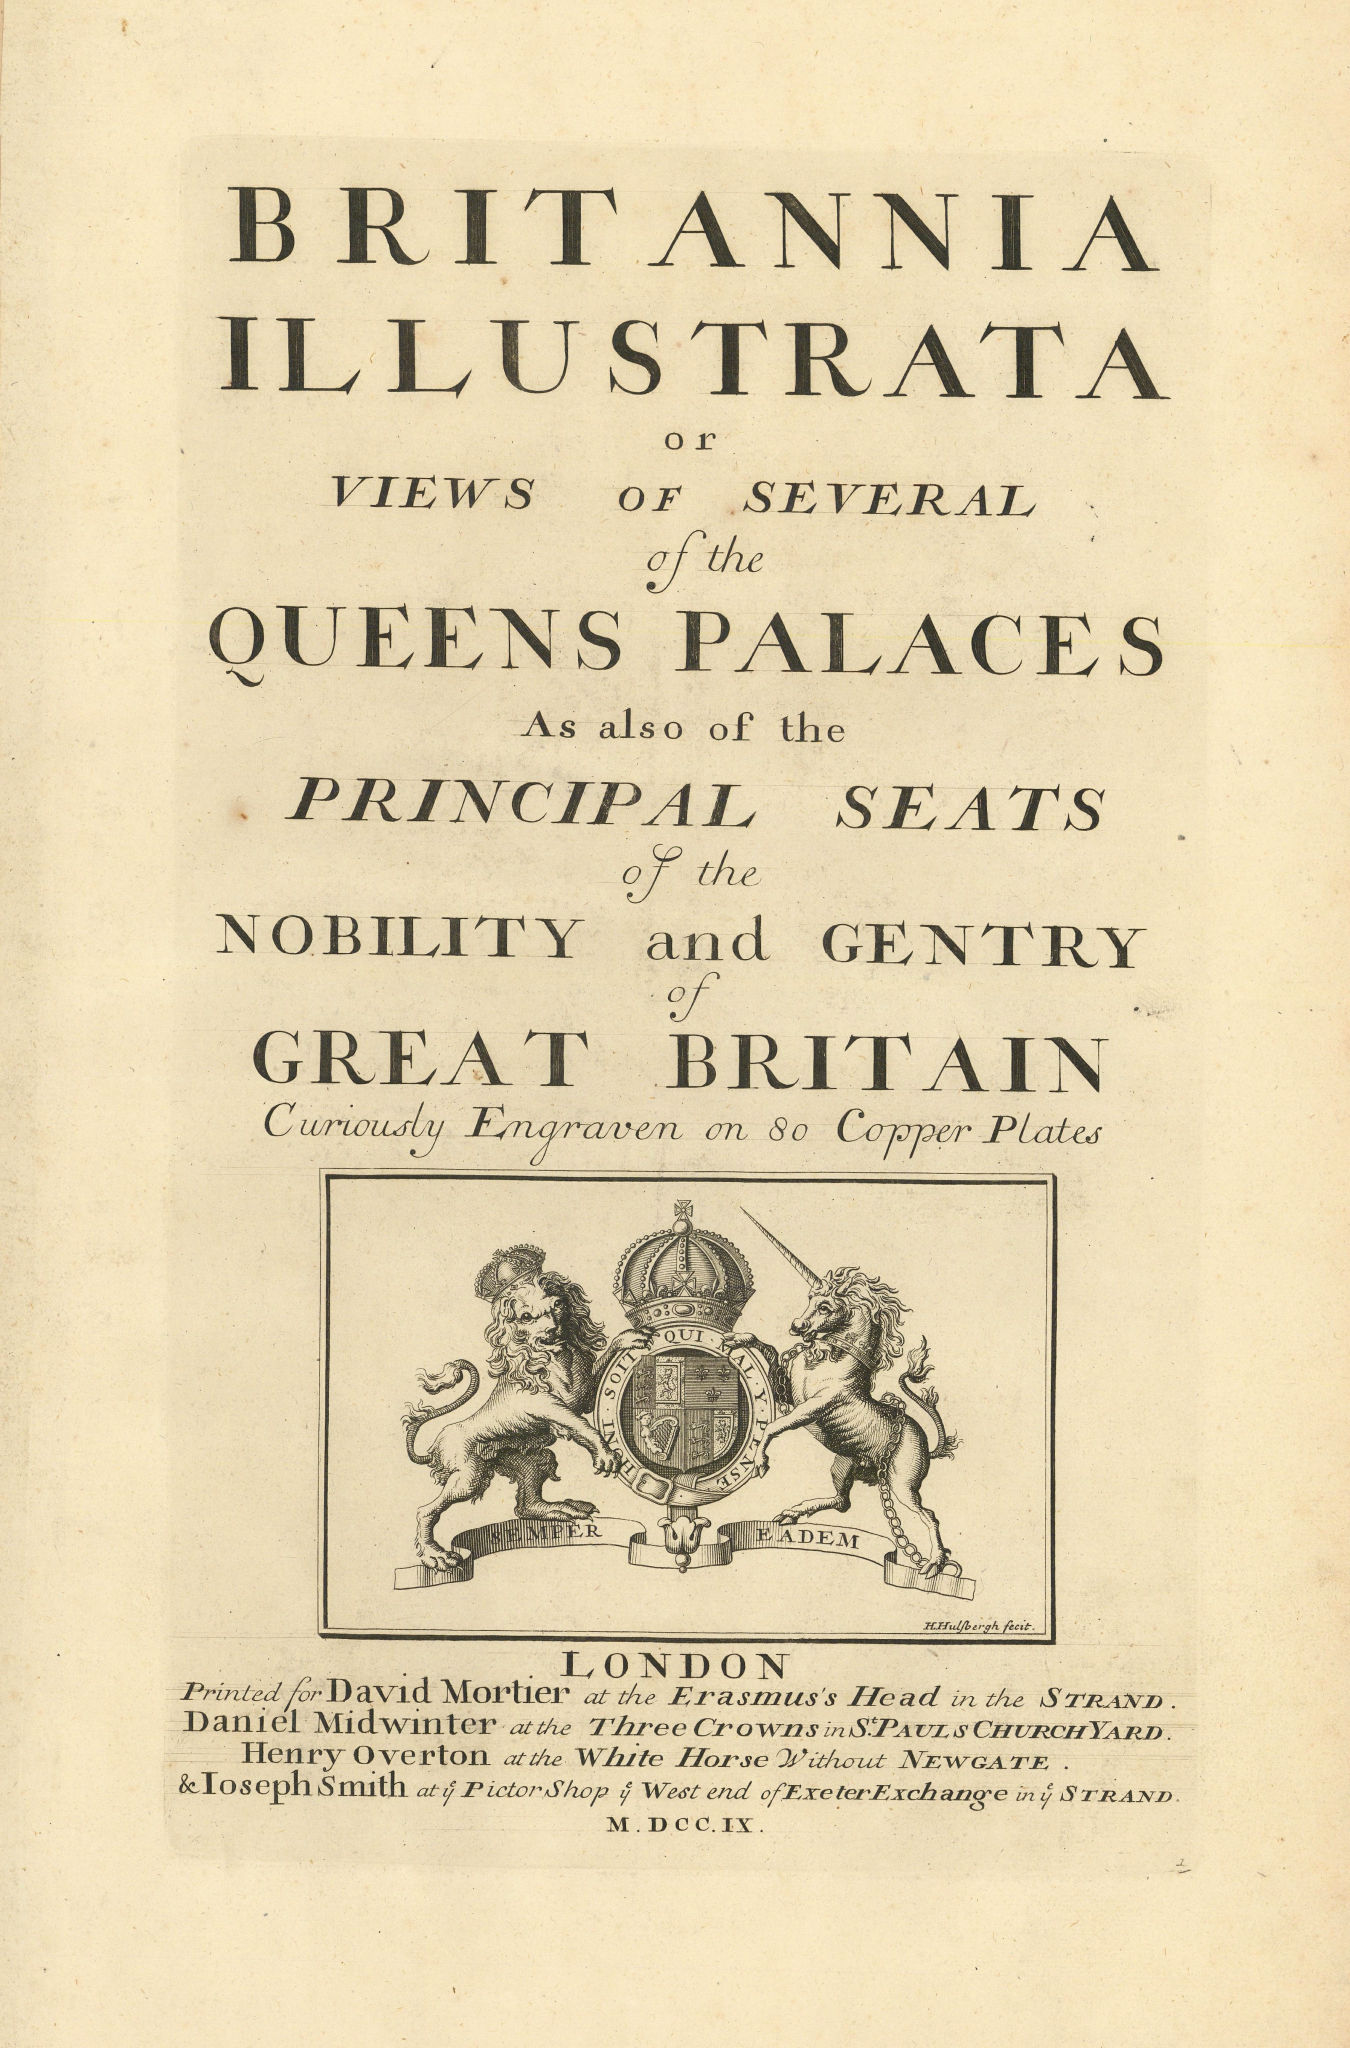 Britannia Illustrata or views of several of the Queens palaces. Title page 1709